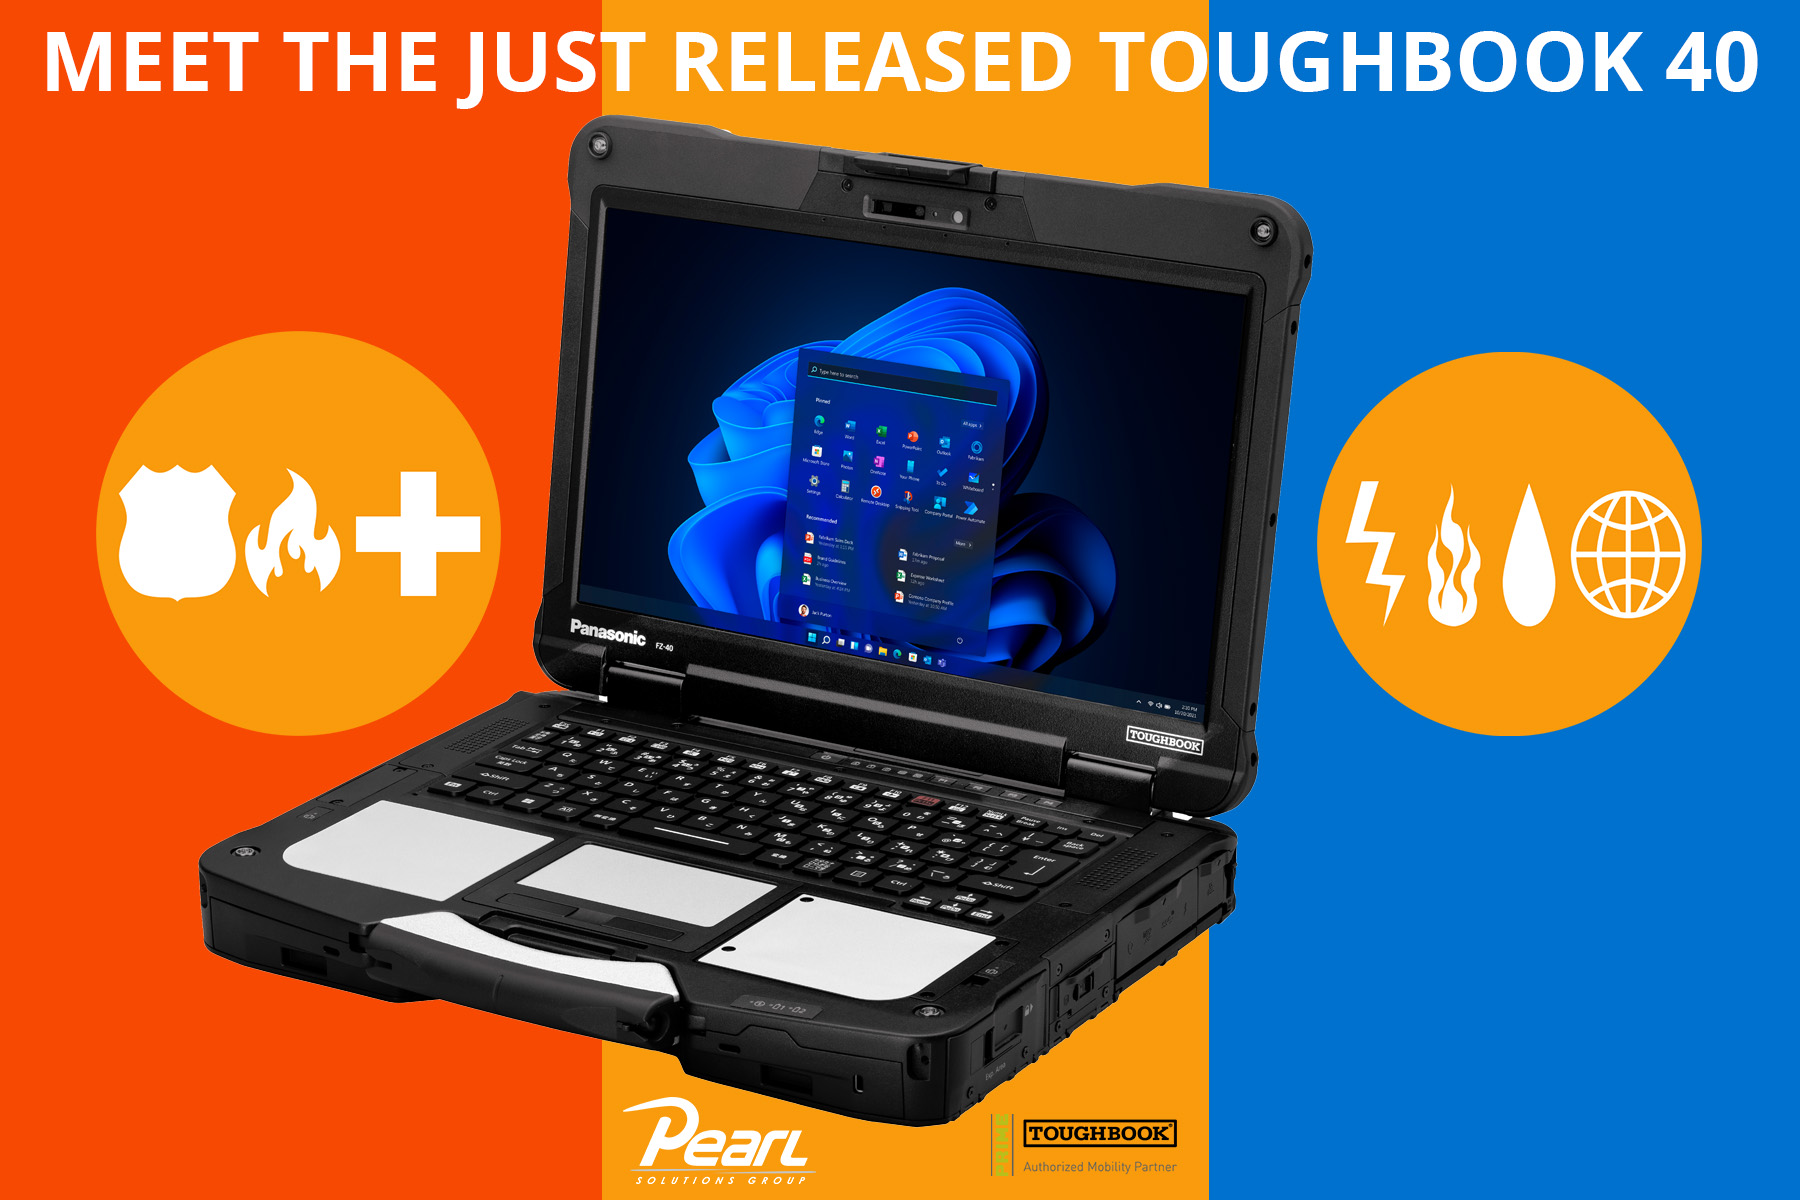 TOUGHBOOK 40 for Utilities and Public Safety